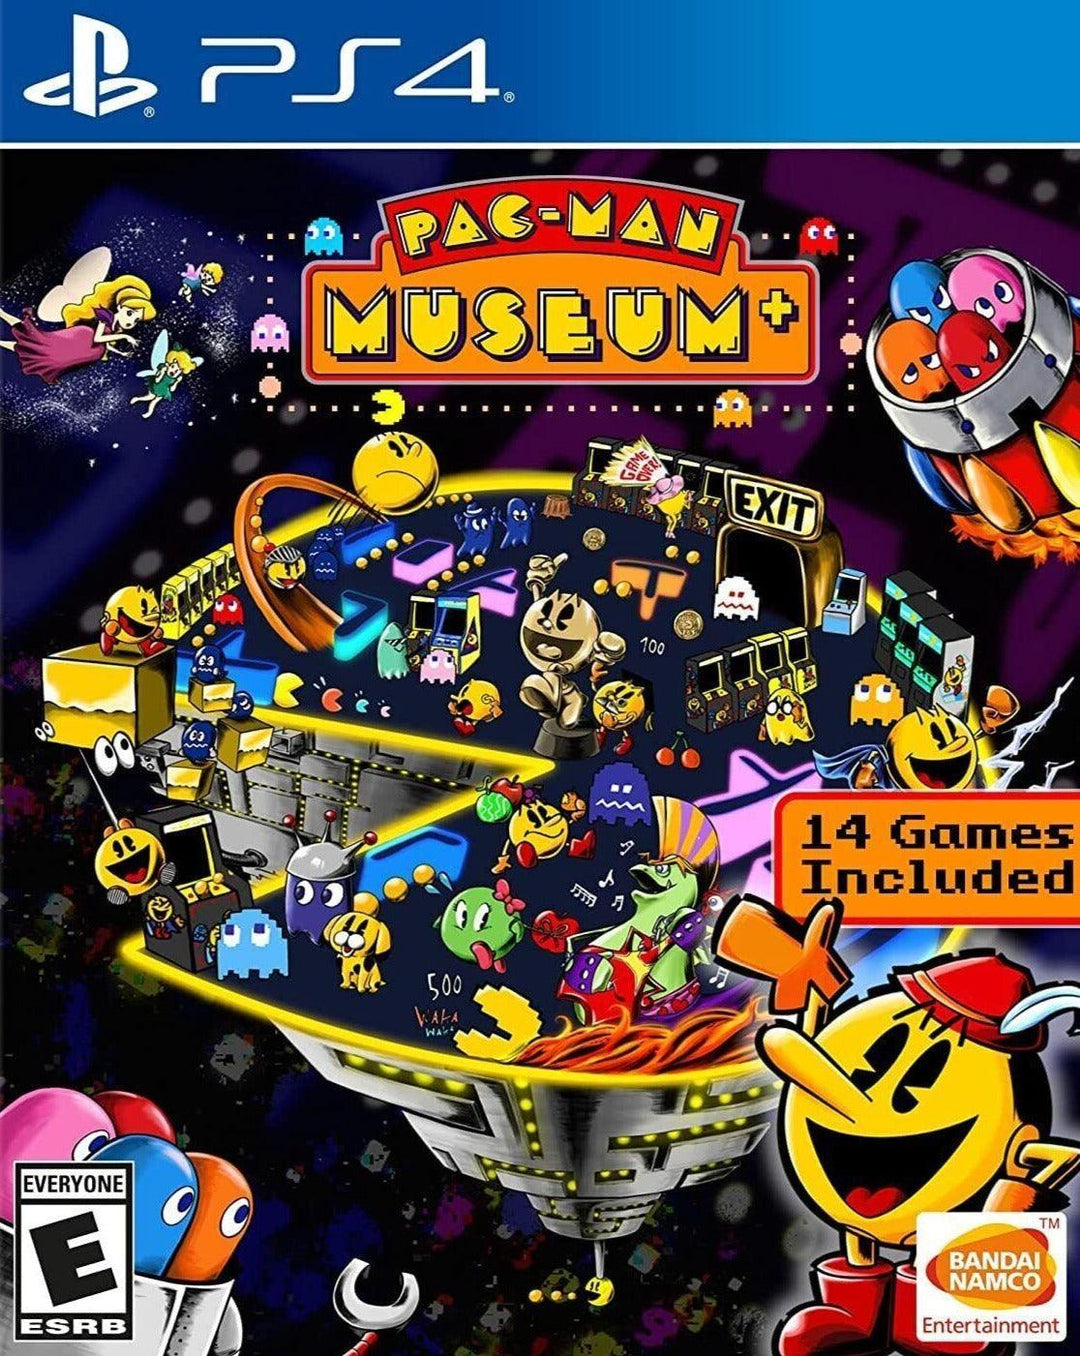 PAC-MAN MUSEUM+ / PS4 / Playstation 4 - GD Games 